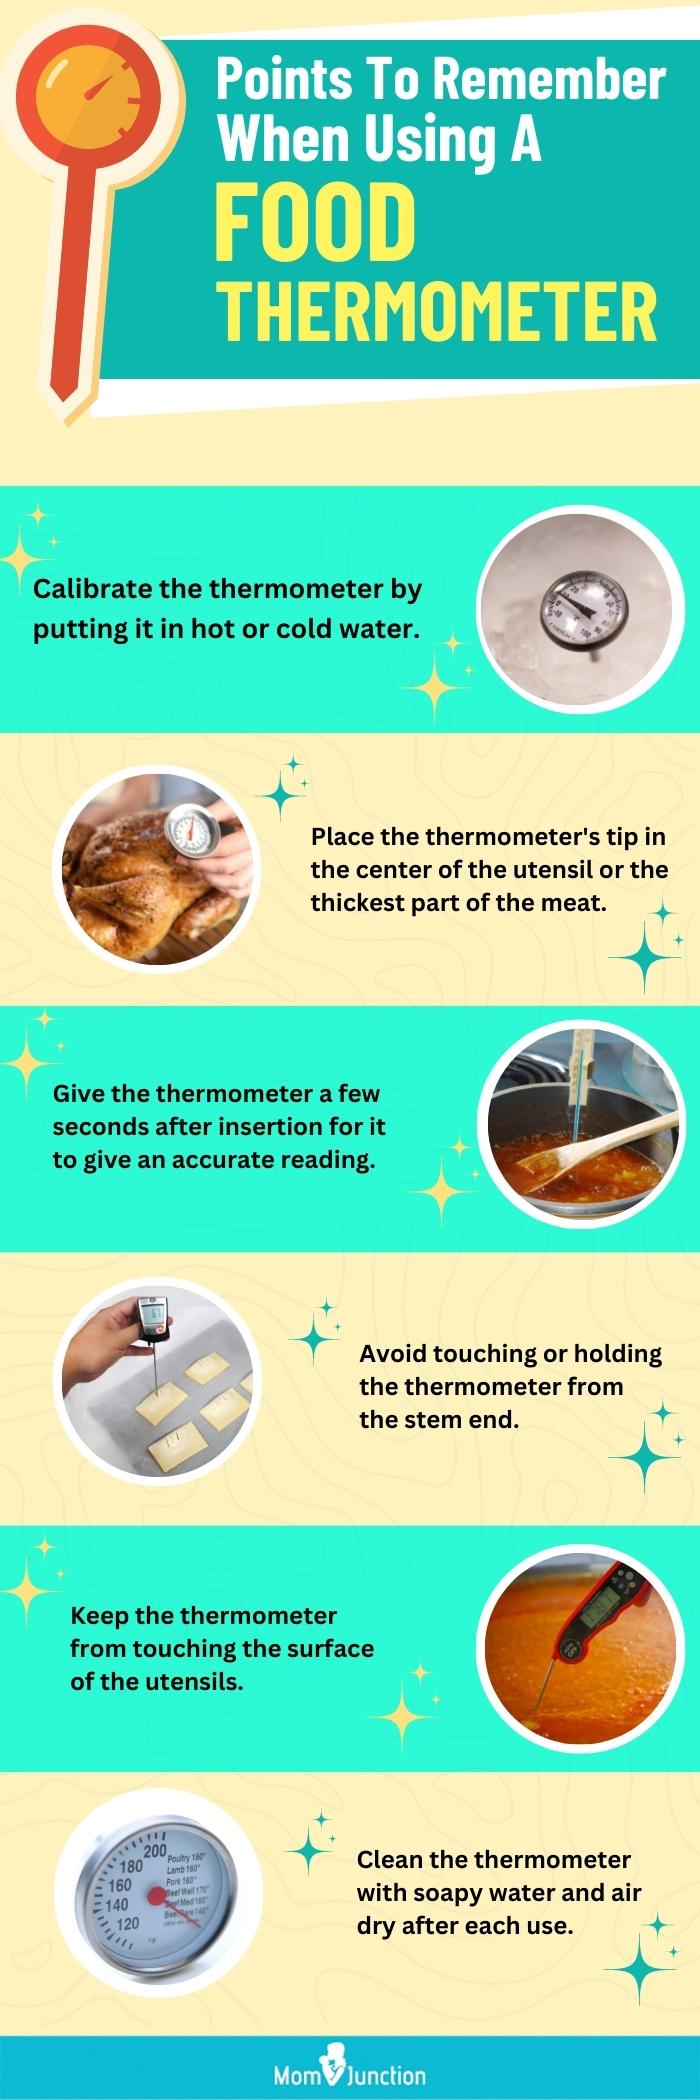 https://www.momjunction.com/wp-content/uploads/2023/07/Points-To-Remember-When-Using-A-Food-Thermometer-Row-963-Content-Topics.jpg